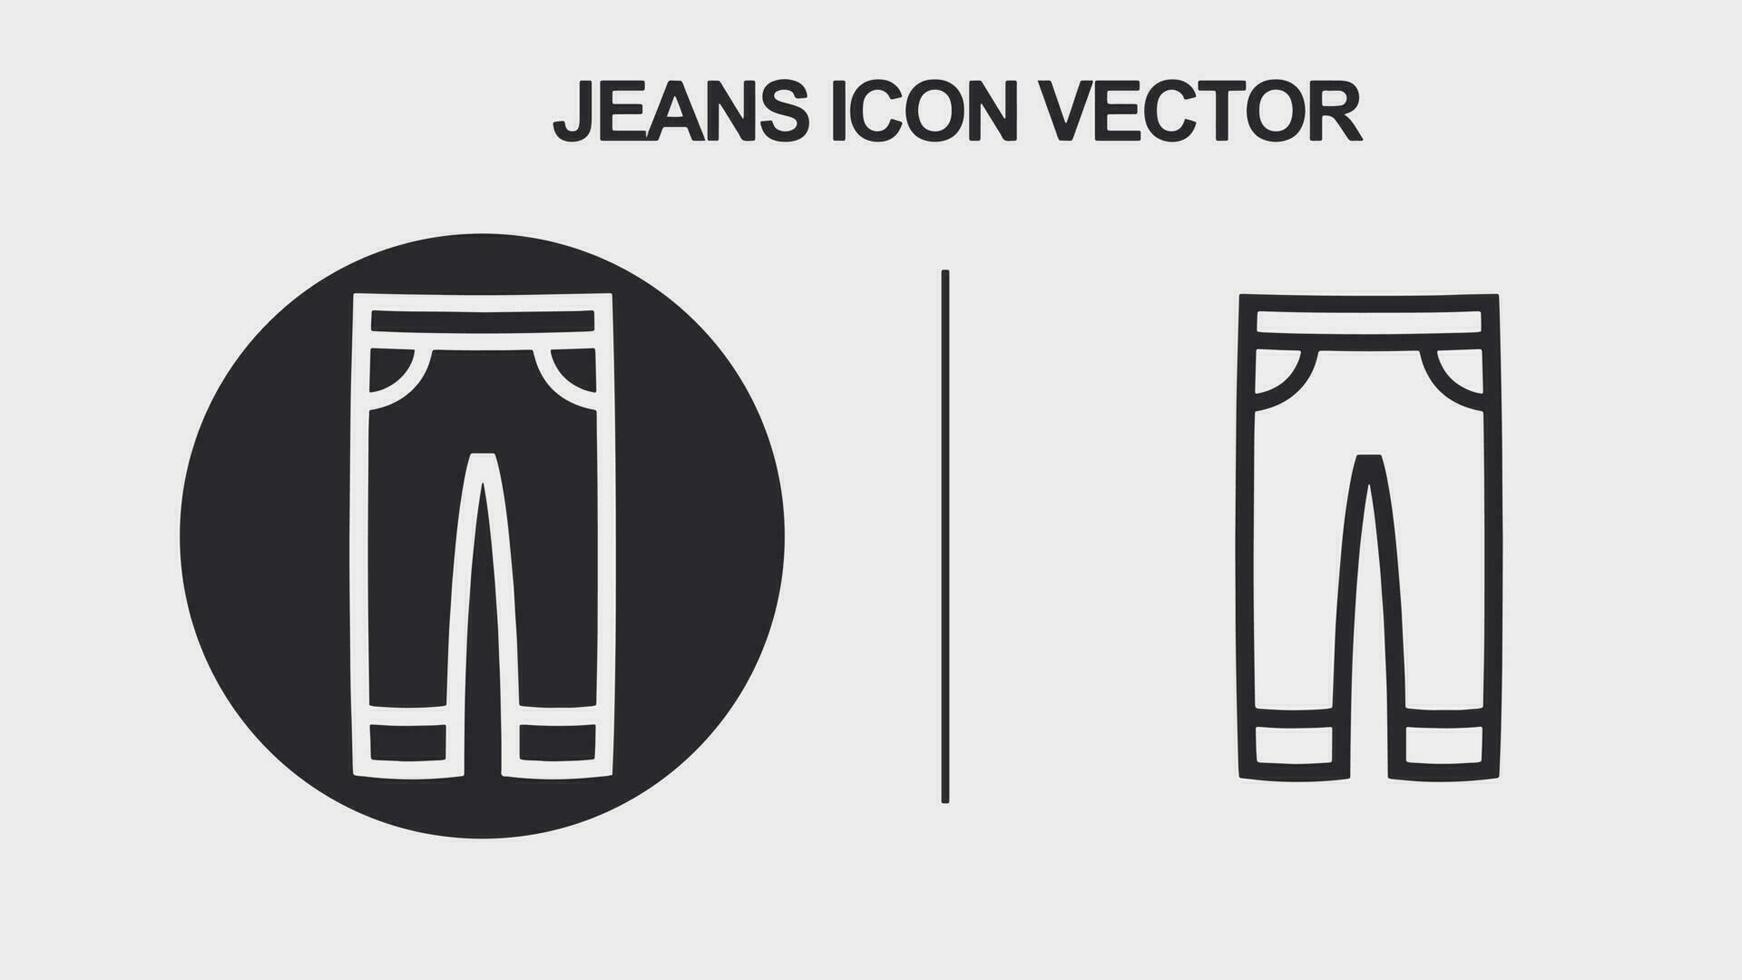 Jeans Icon Vector Art, Illustration and Graphic